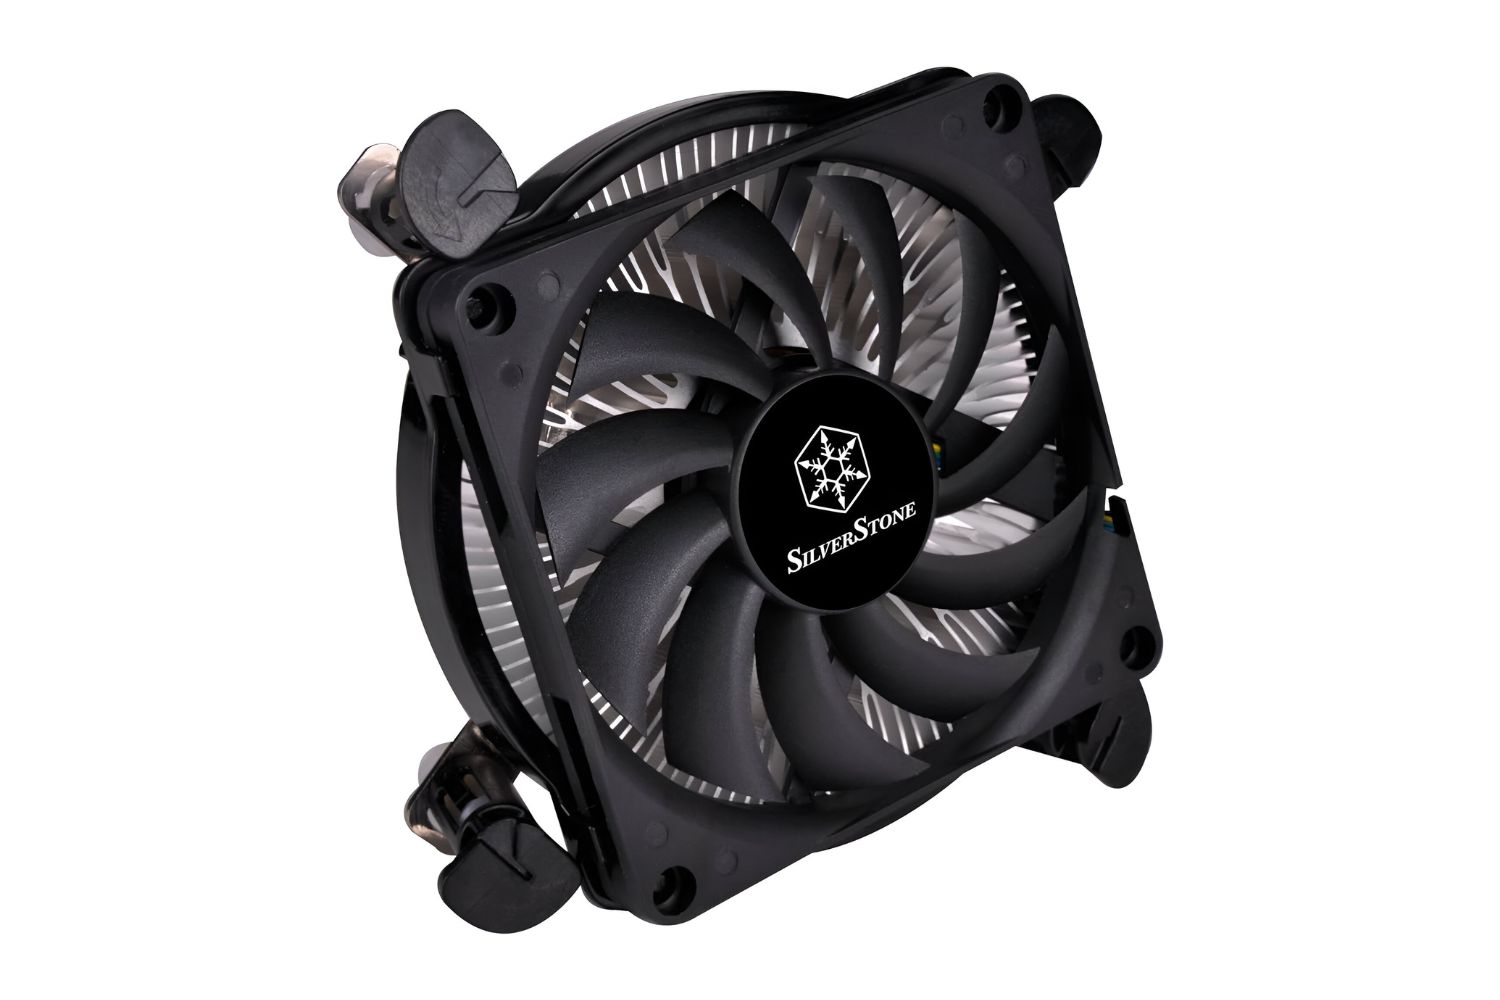 what-is-a-good-cpu-cooler-fan-rpm-for-an-intel-i5-4430